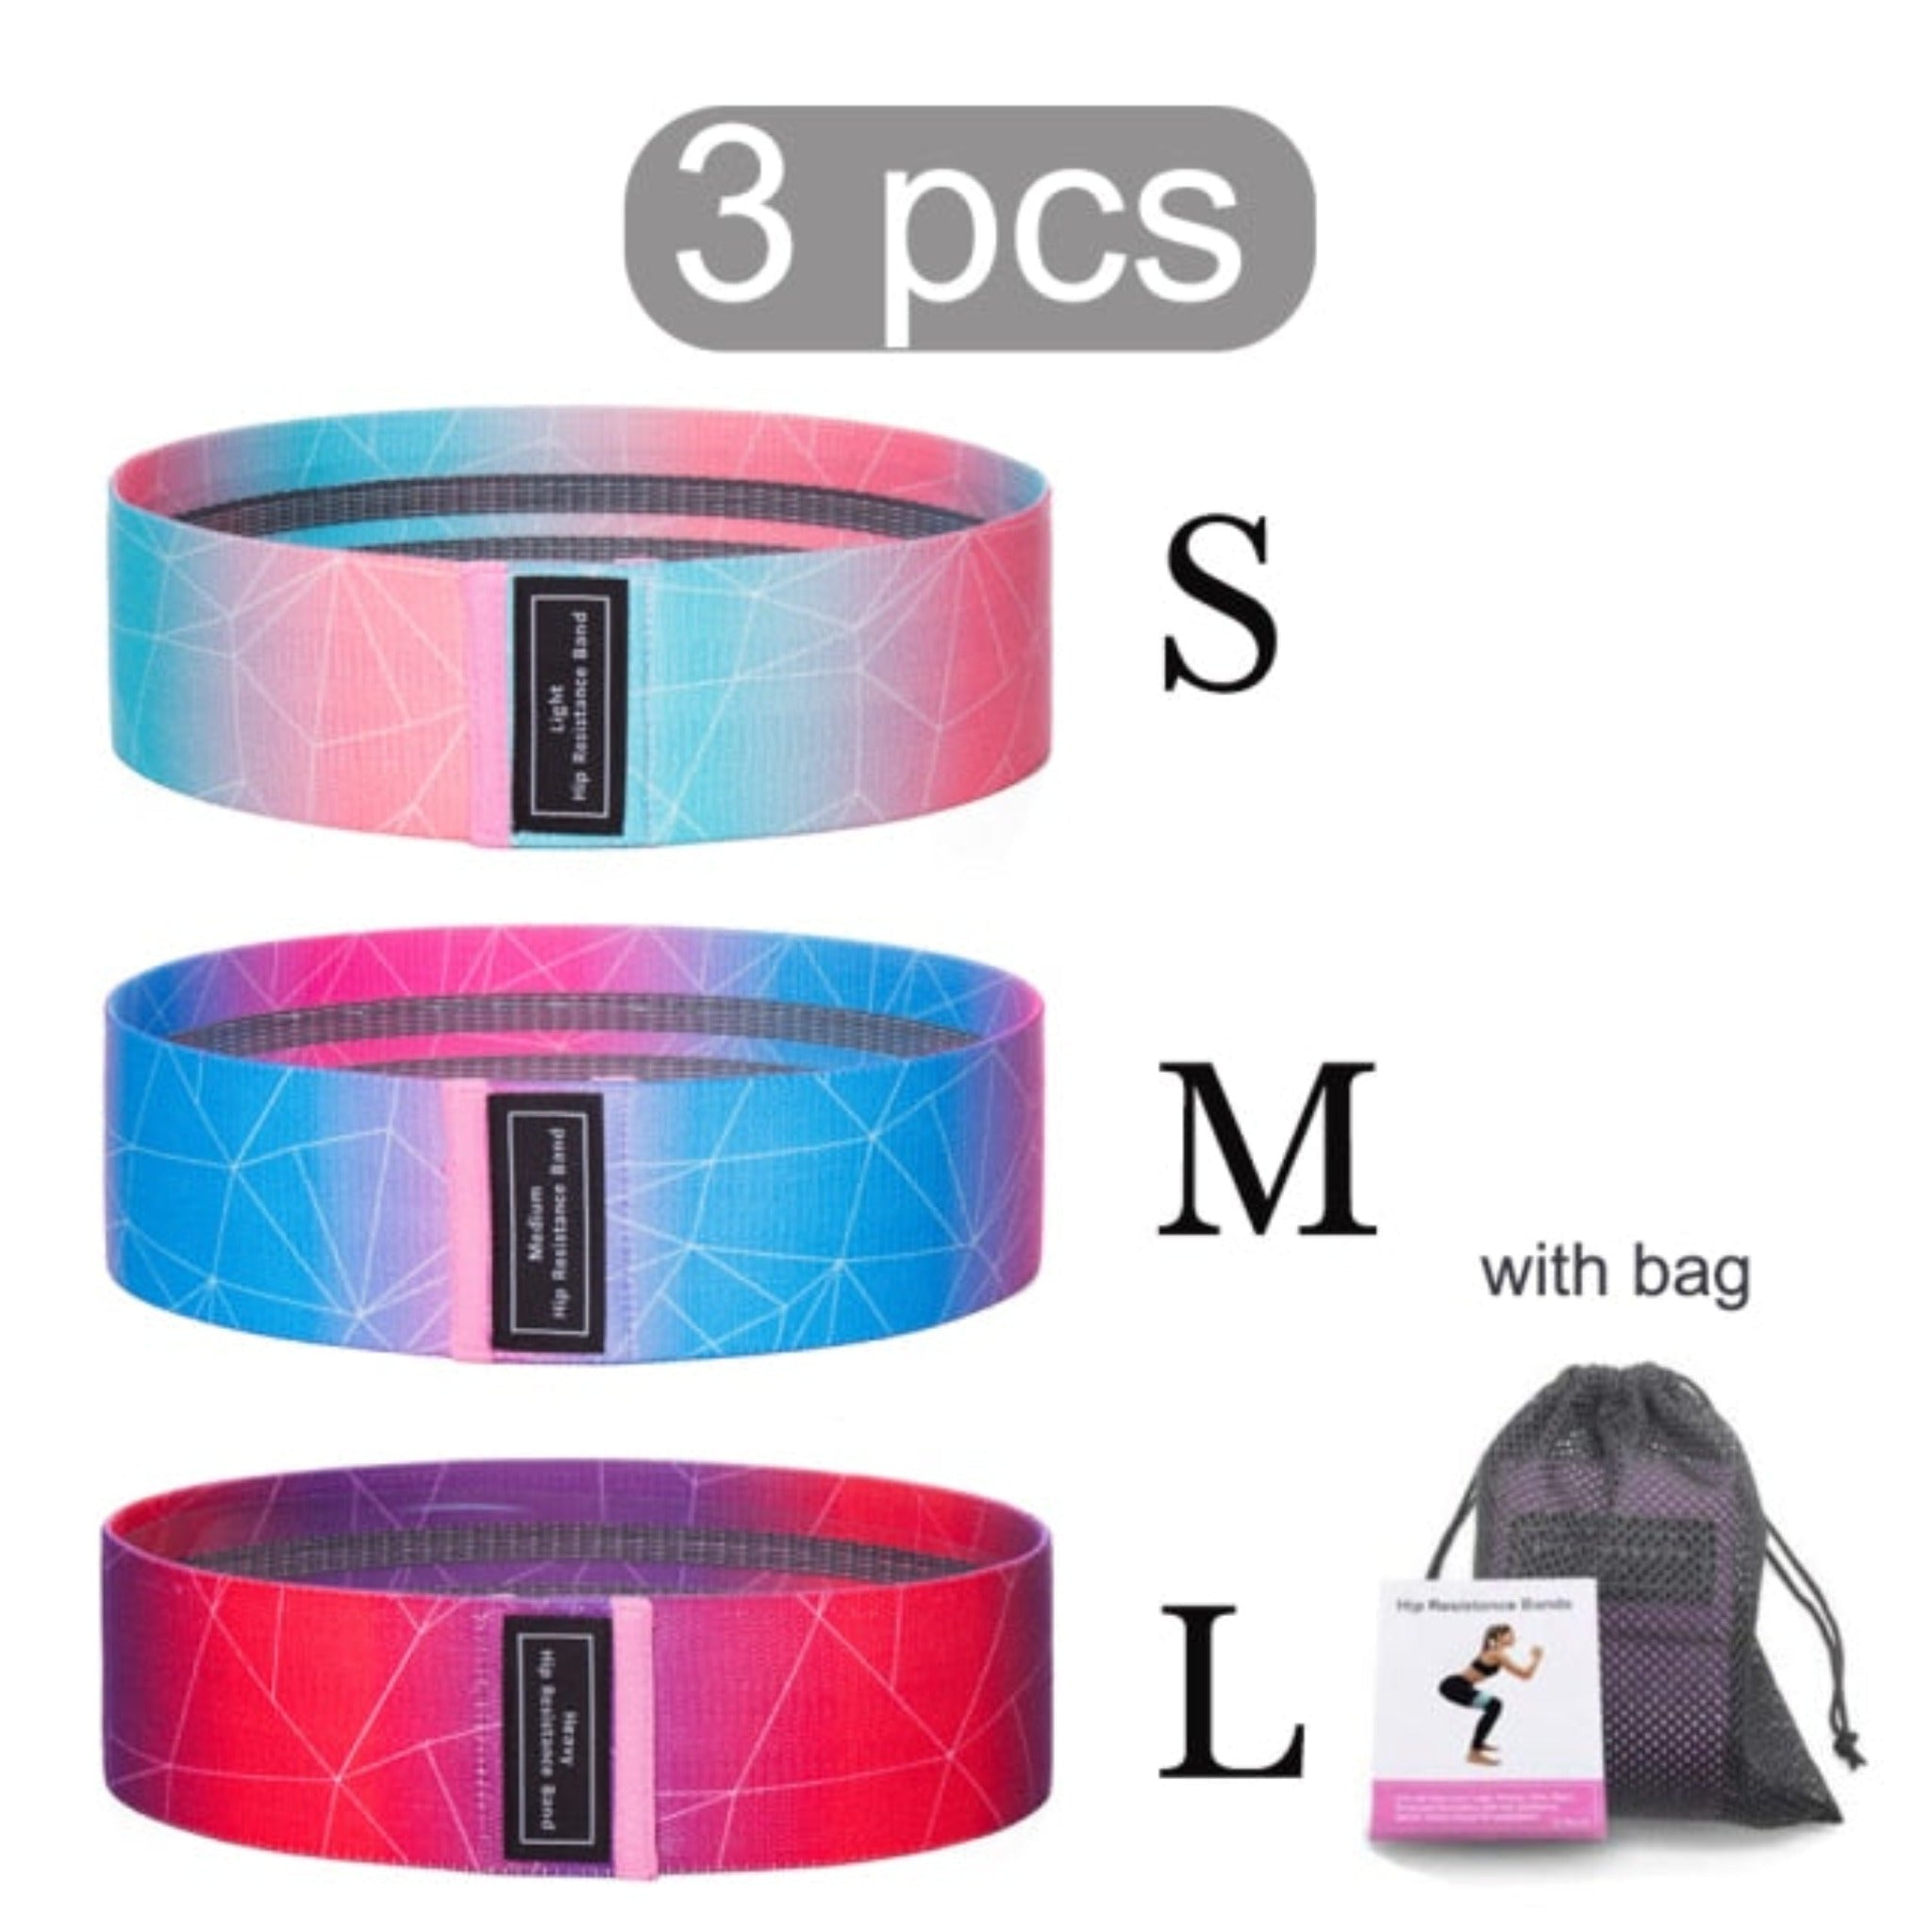 3 pcs booty bands resistance bands with bag and white background (small, medium, and large)